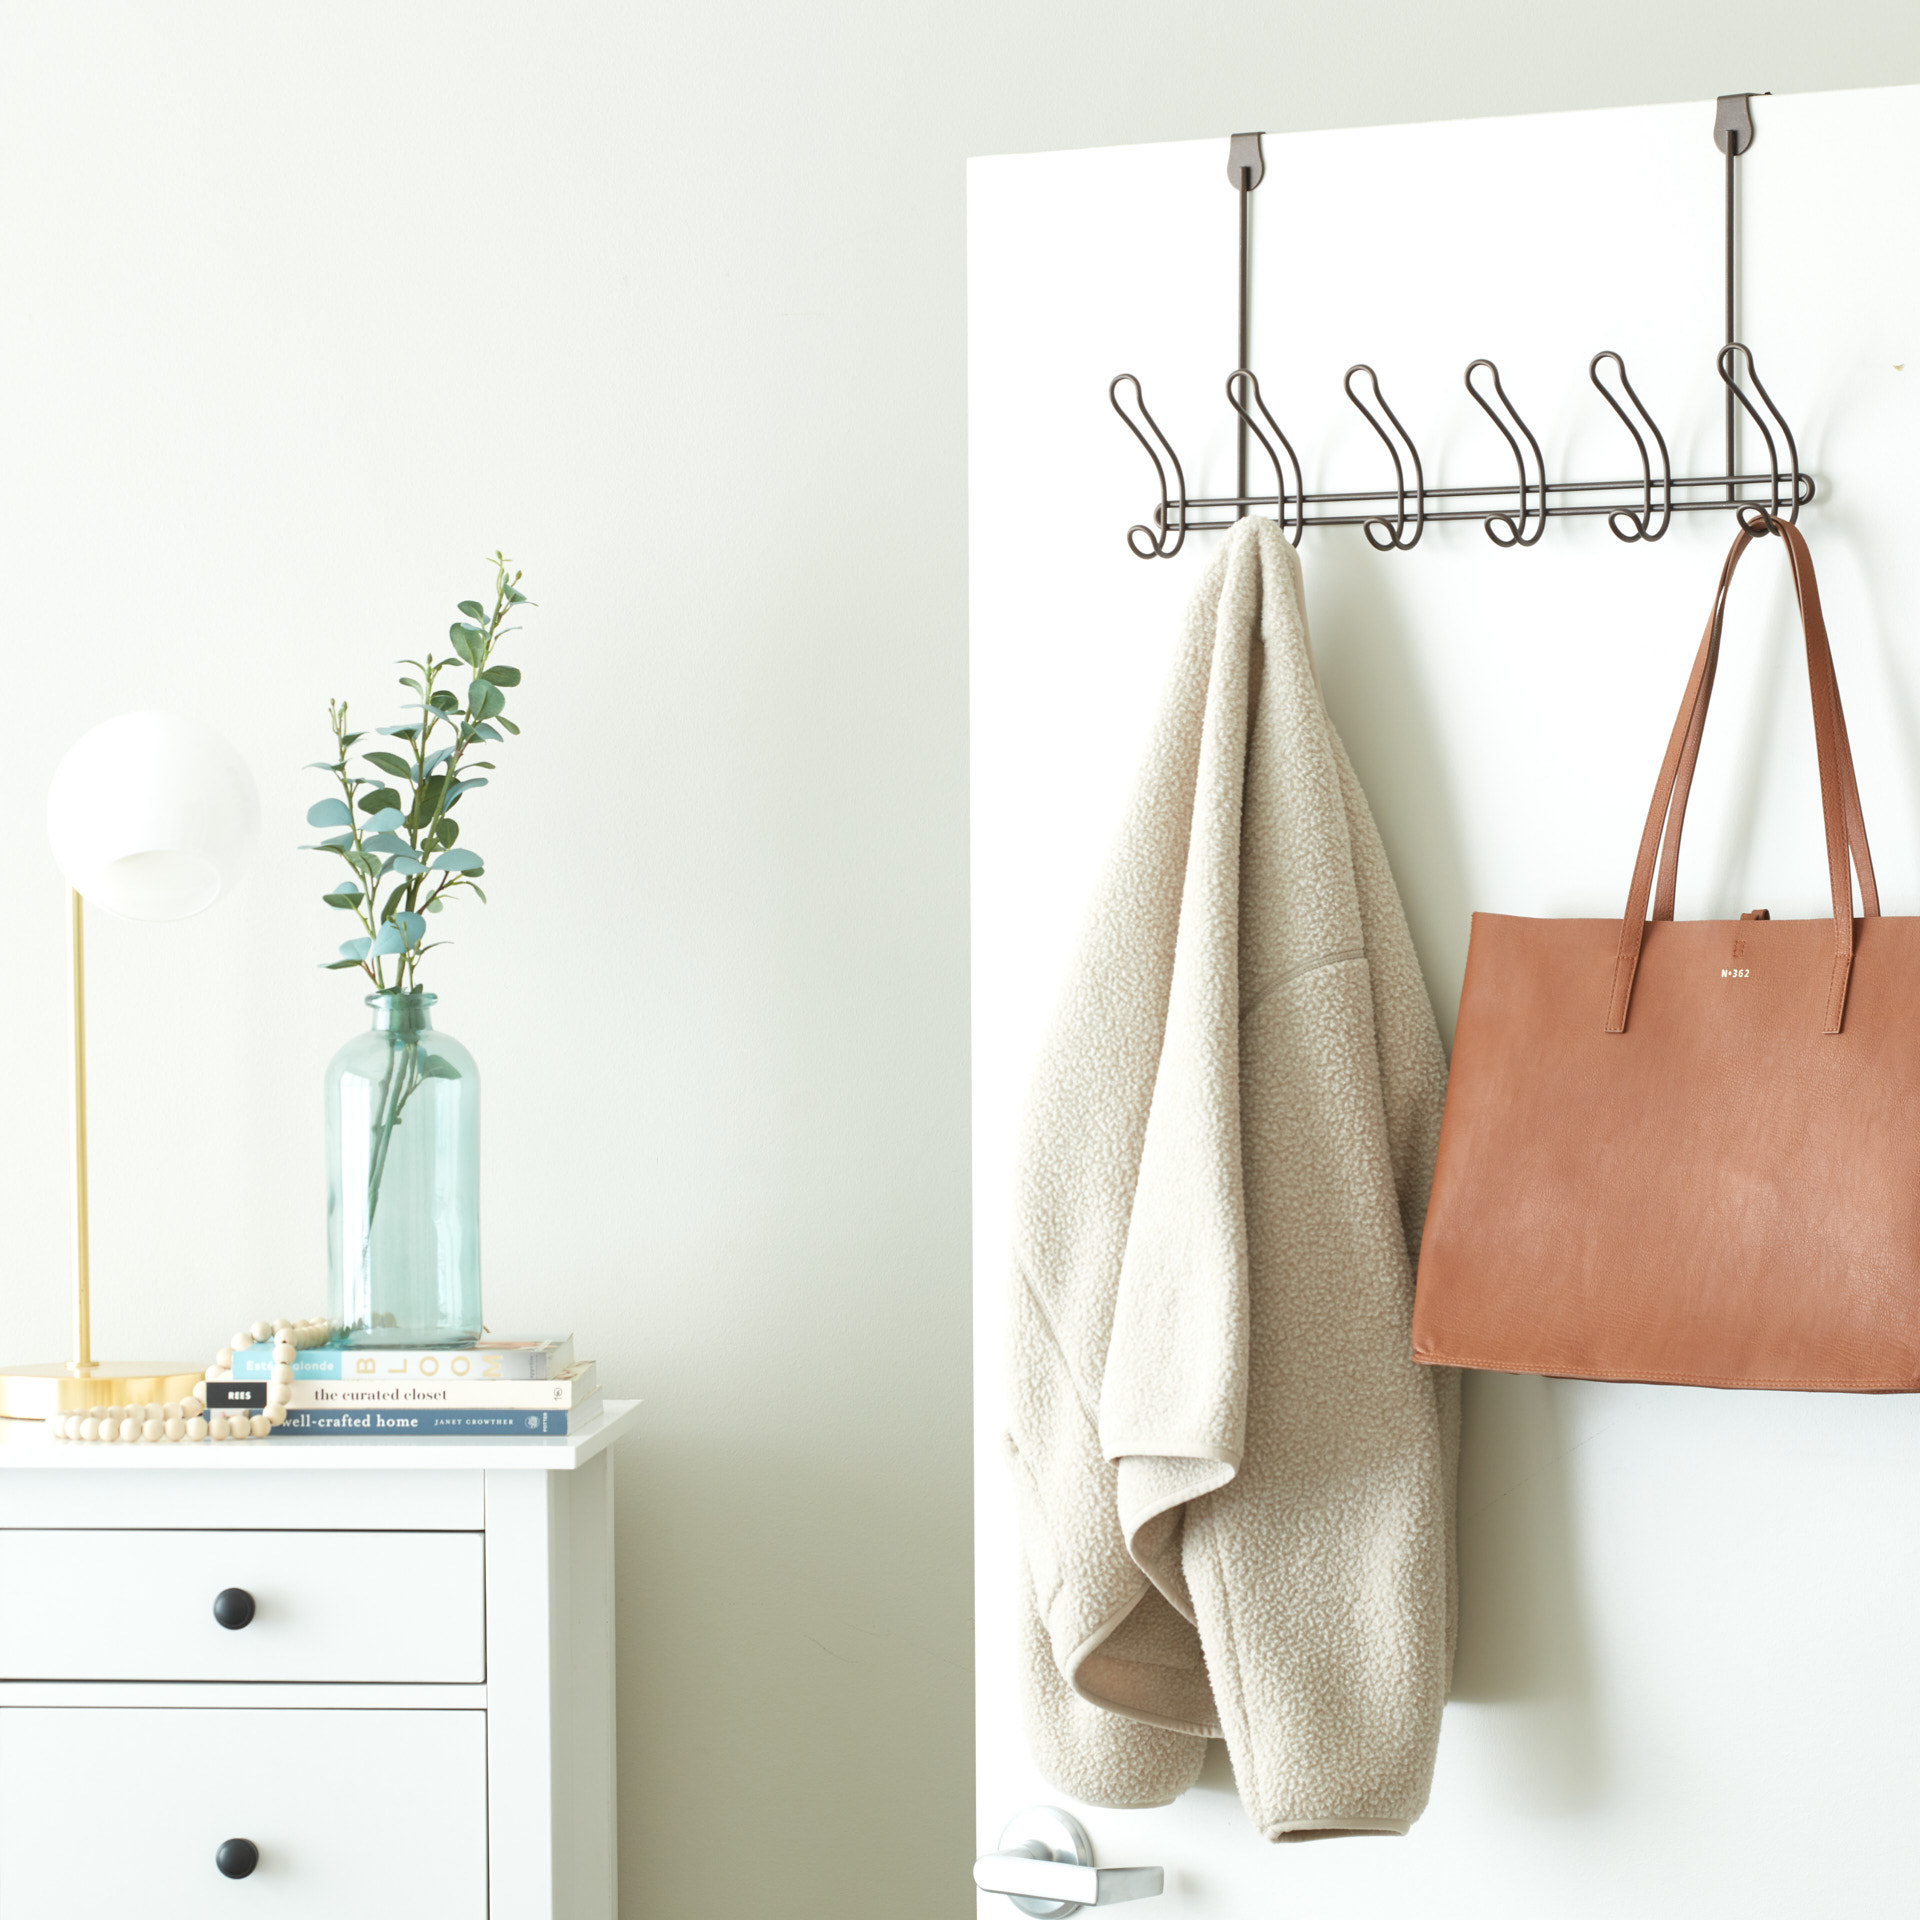 over-the-door coat rack holding a coat and purse 